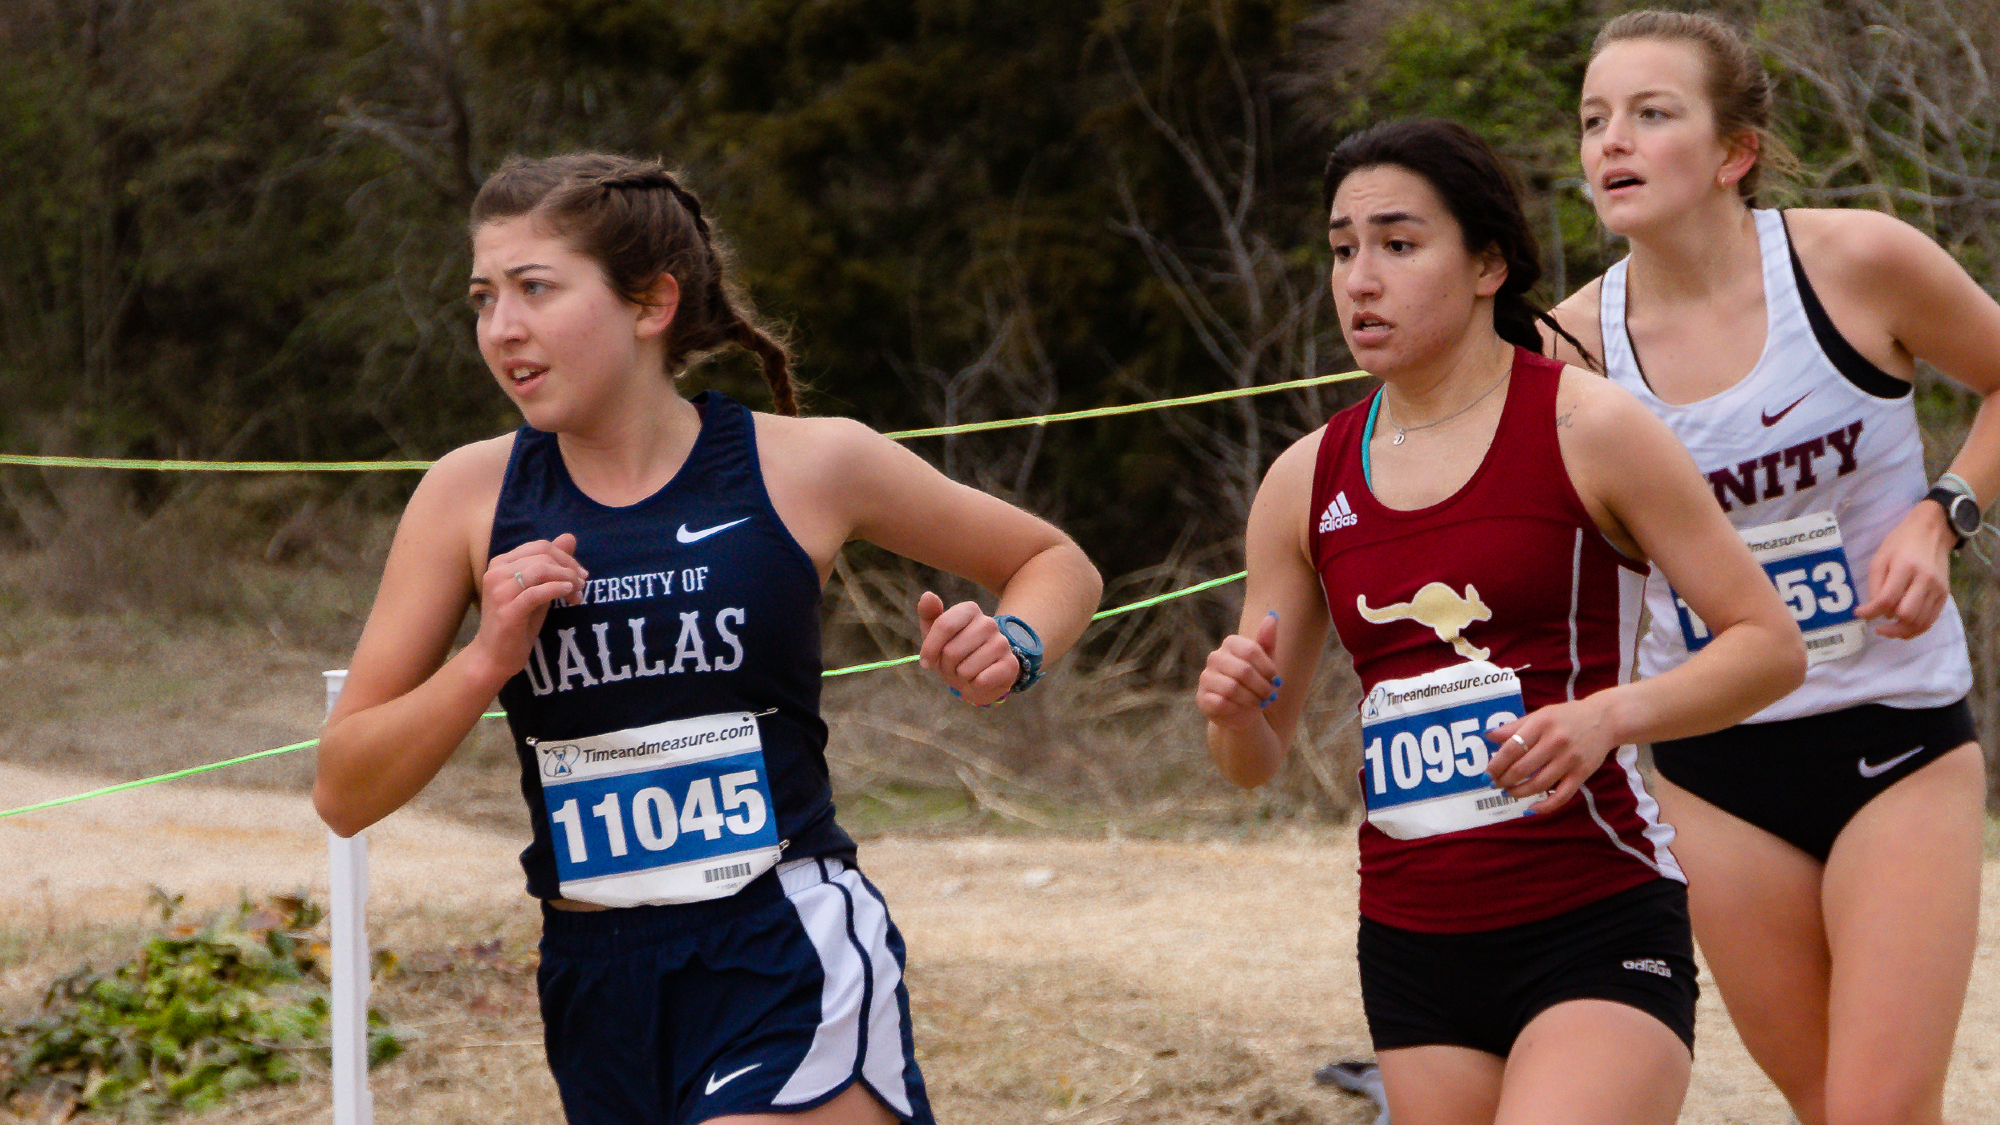 Crusaders Women's Cross Country Raced in SCAC Championship on Saturday